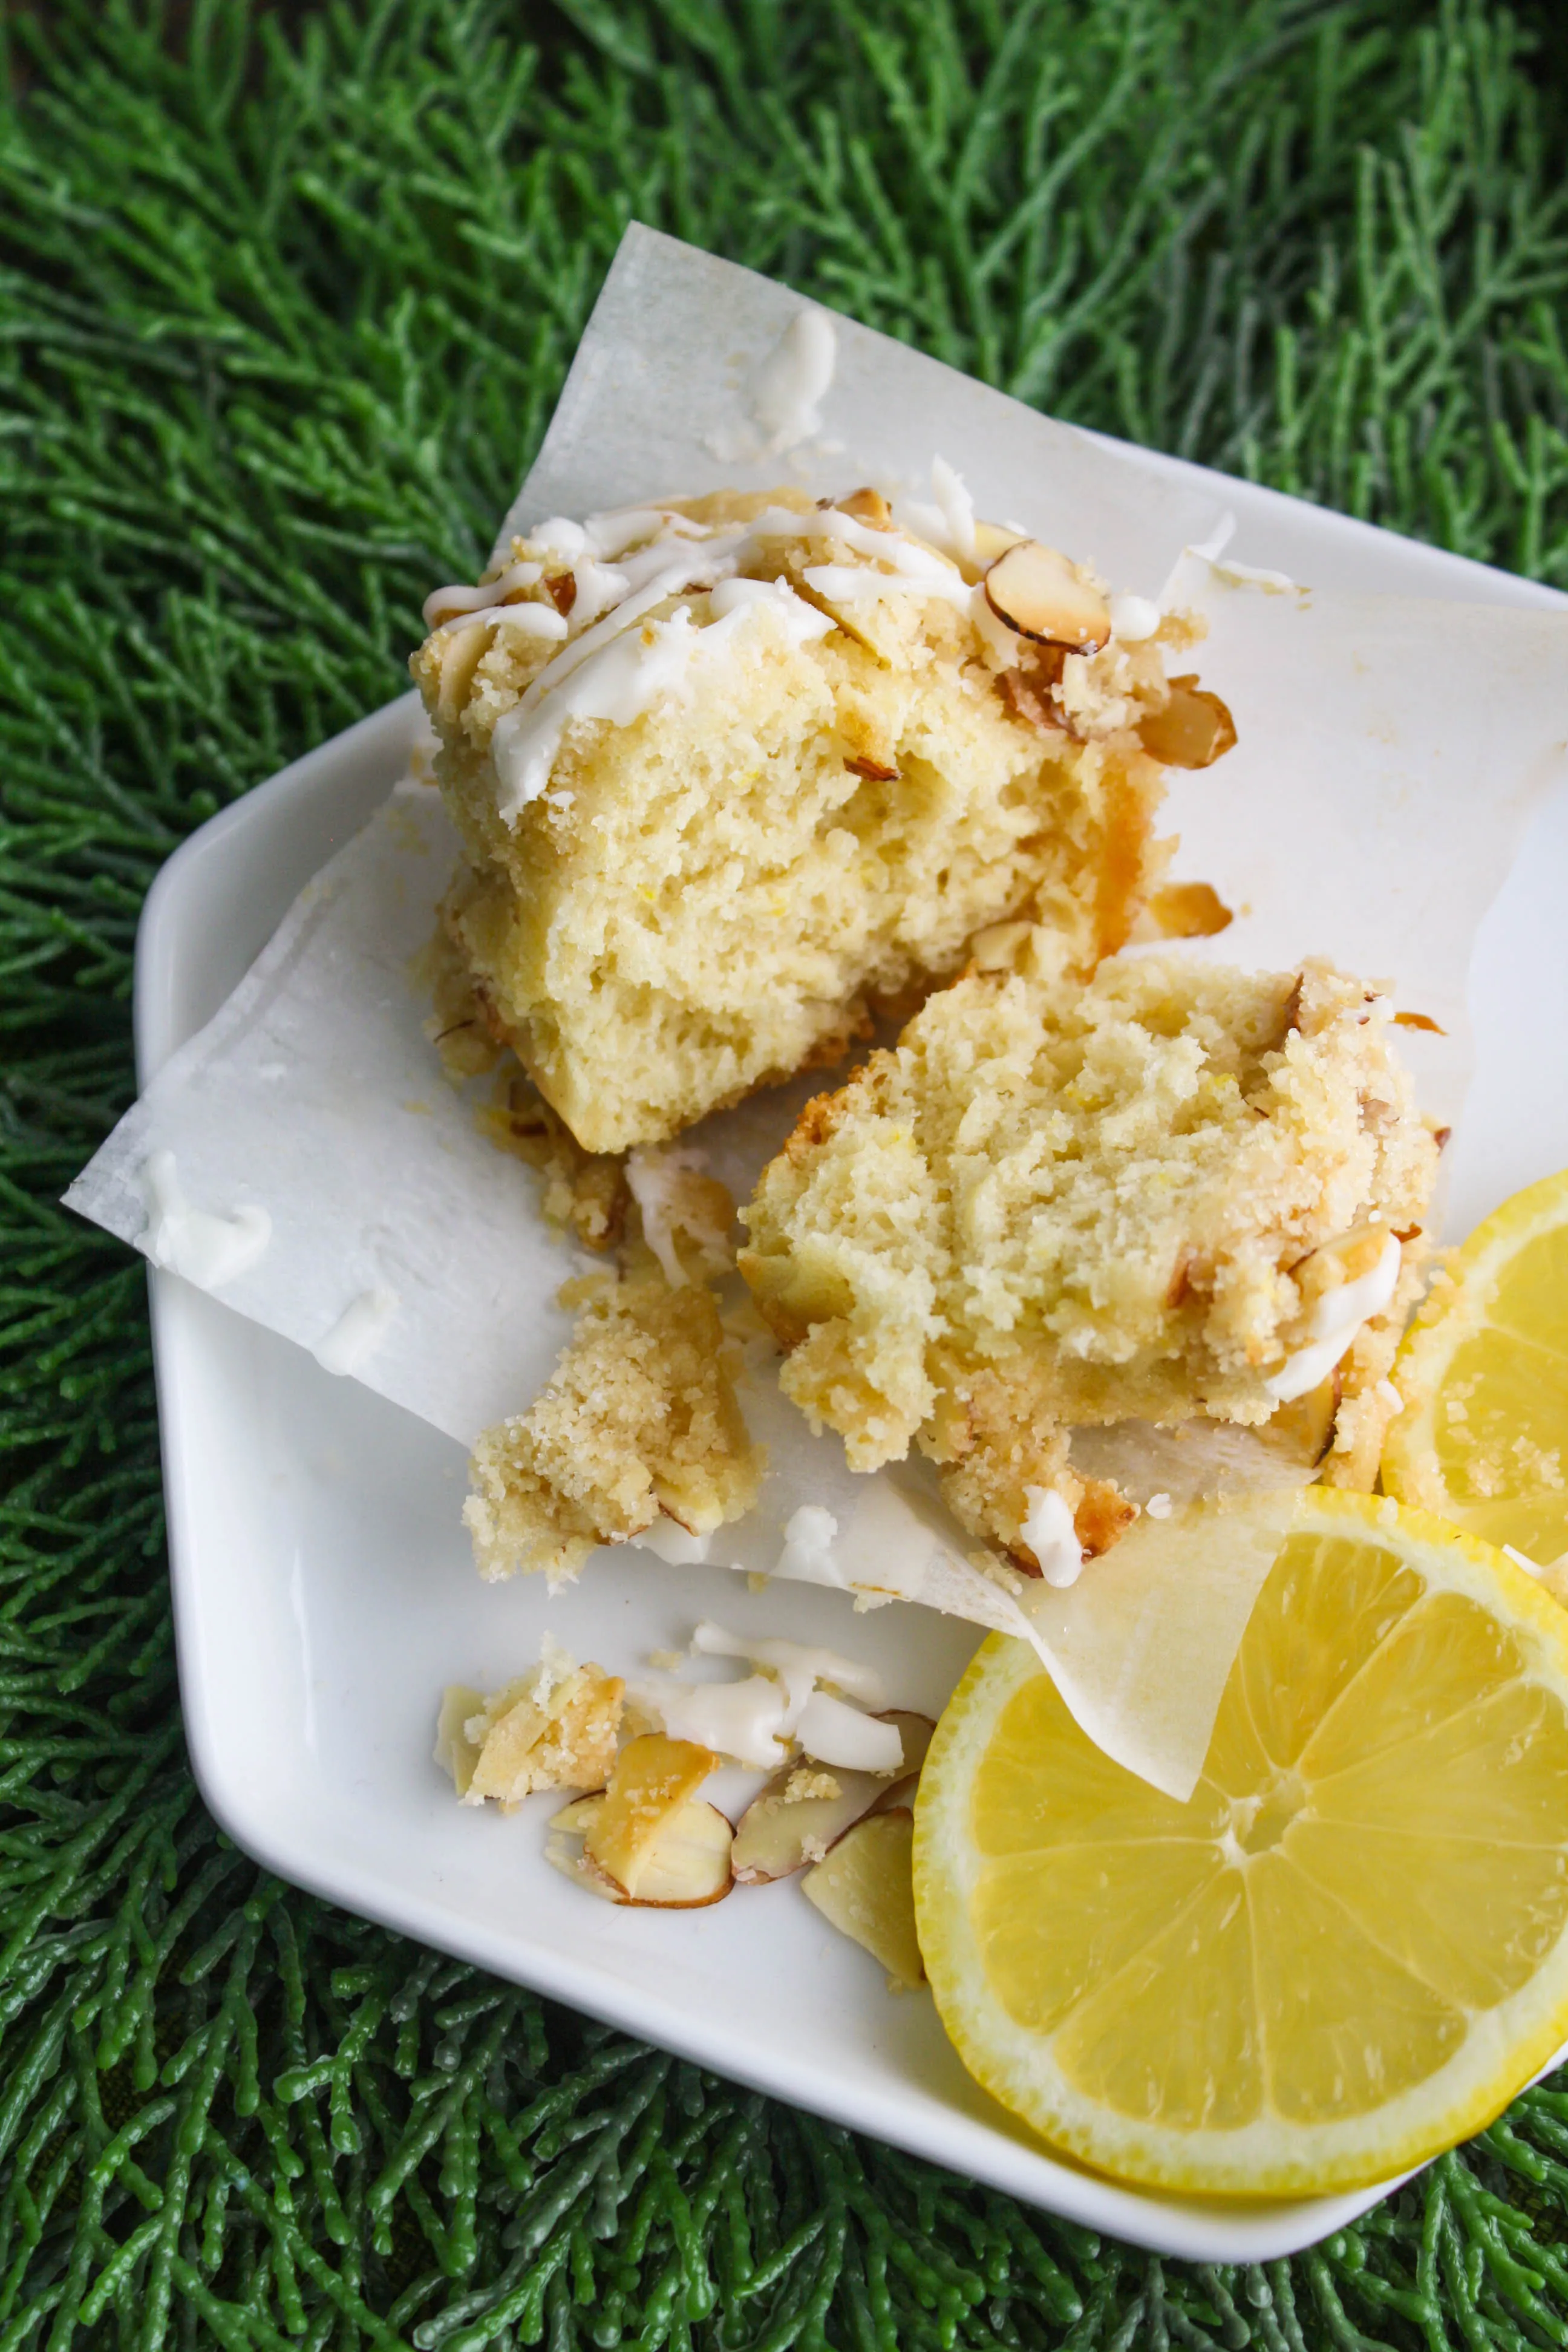 Lemon Muffins with Almond Streusel and Glaze are a tasty breakfast treat. You'll love these lemon muffins any time of day, really!